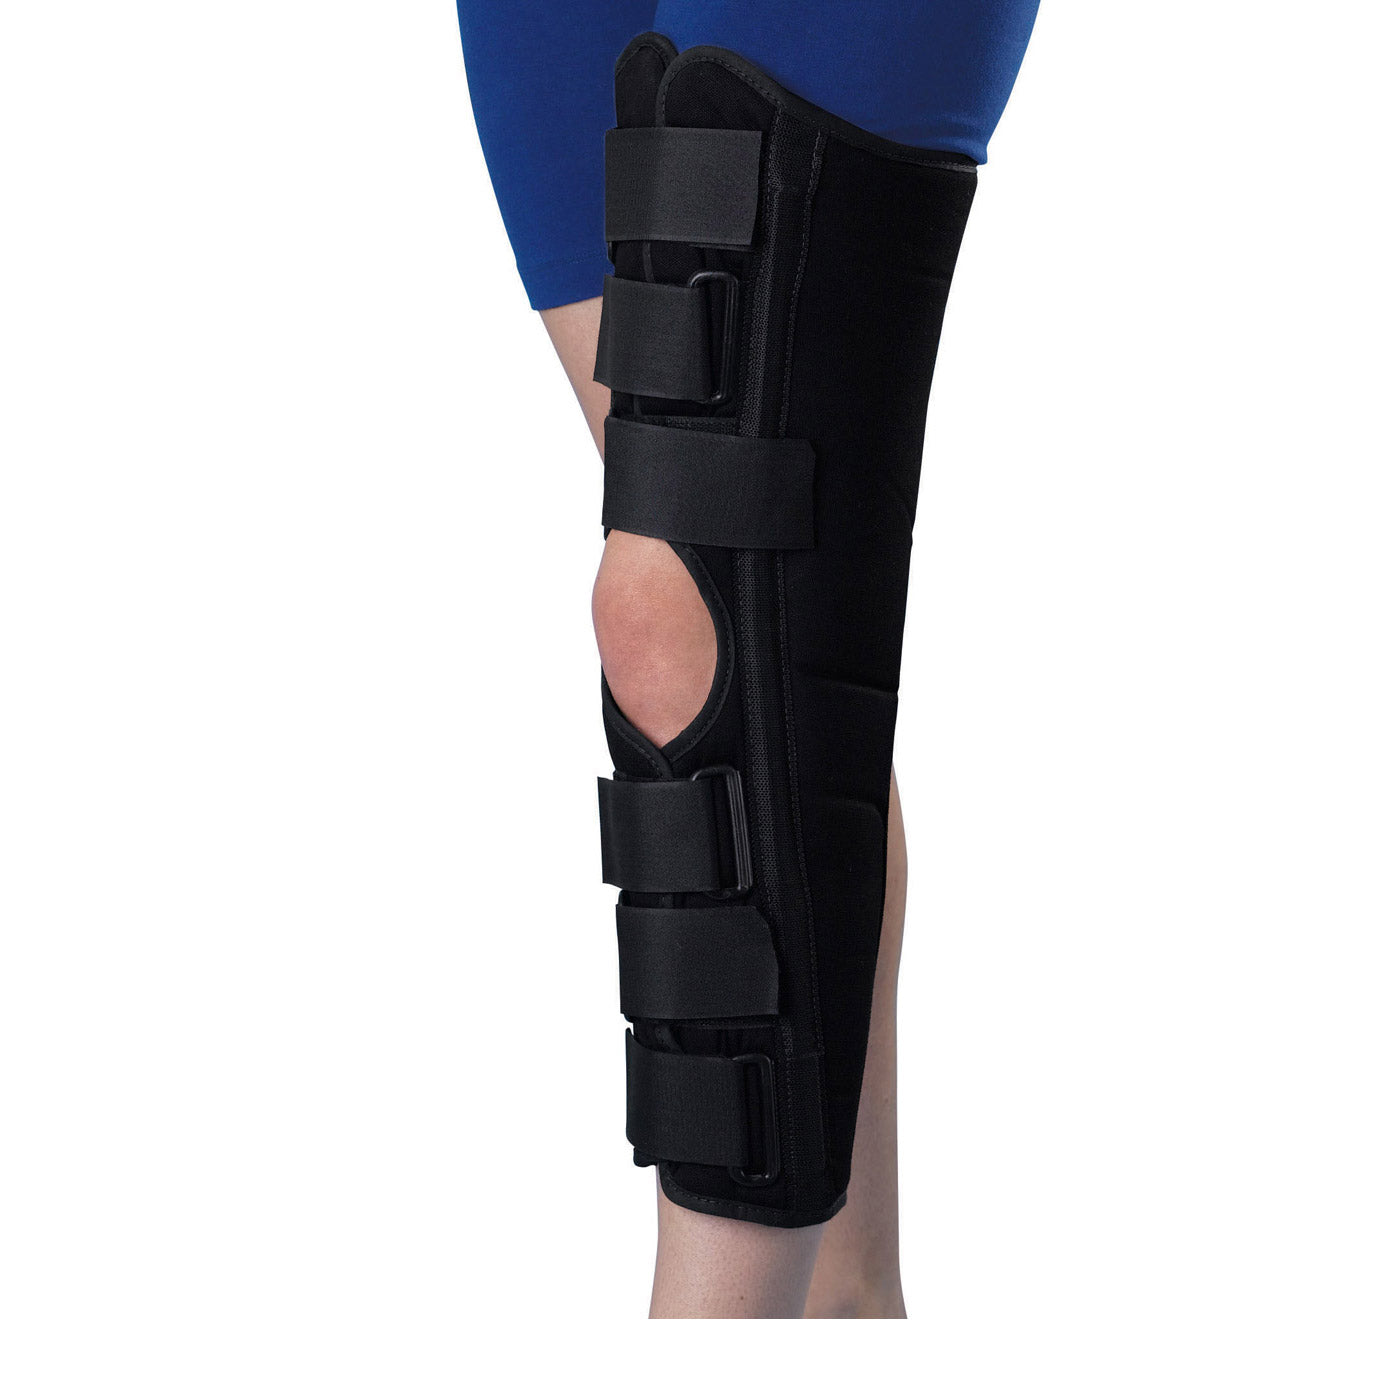 Immobilizer Knee Deluxe 22  LG